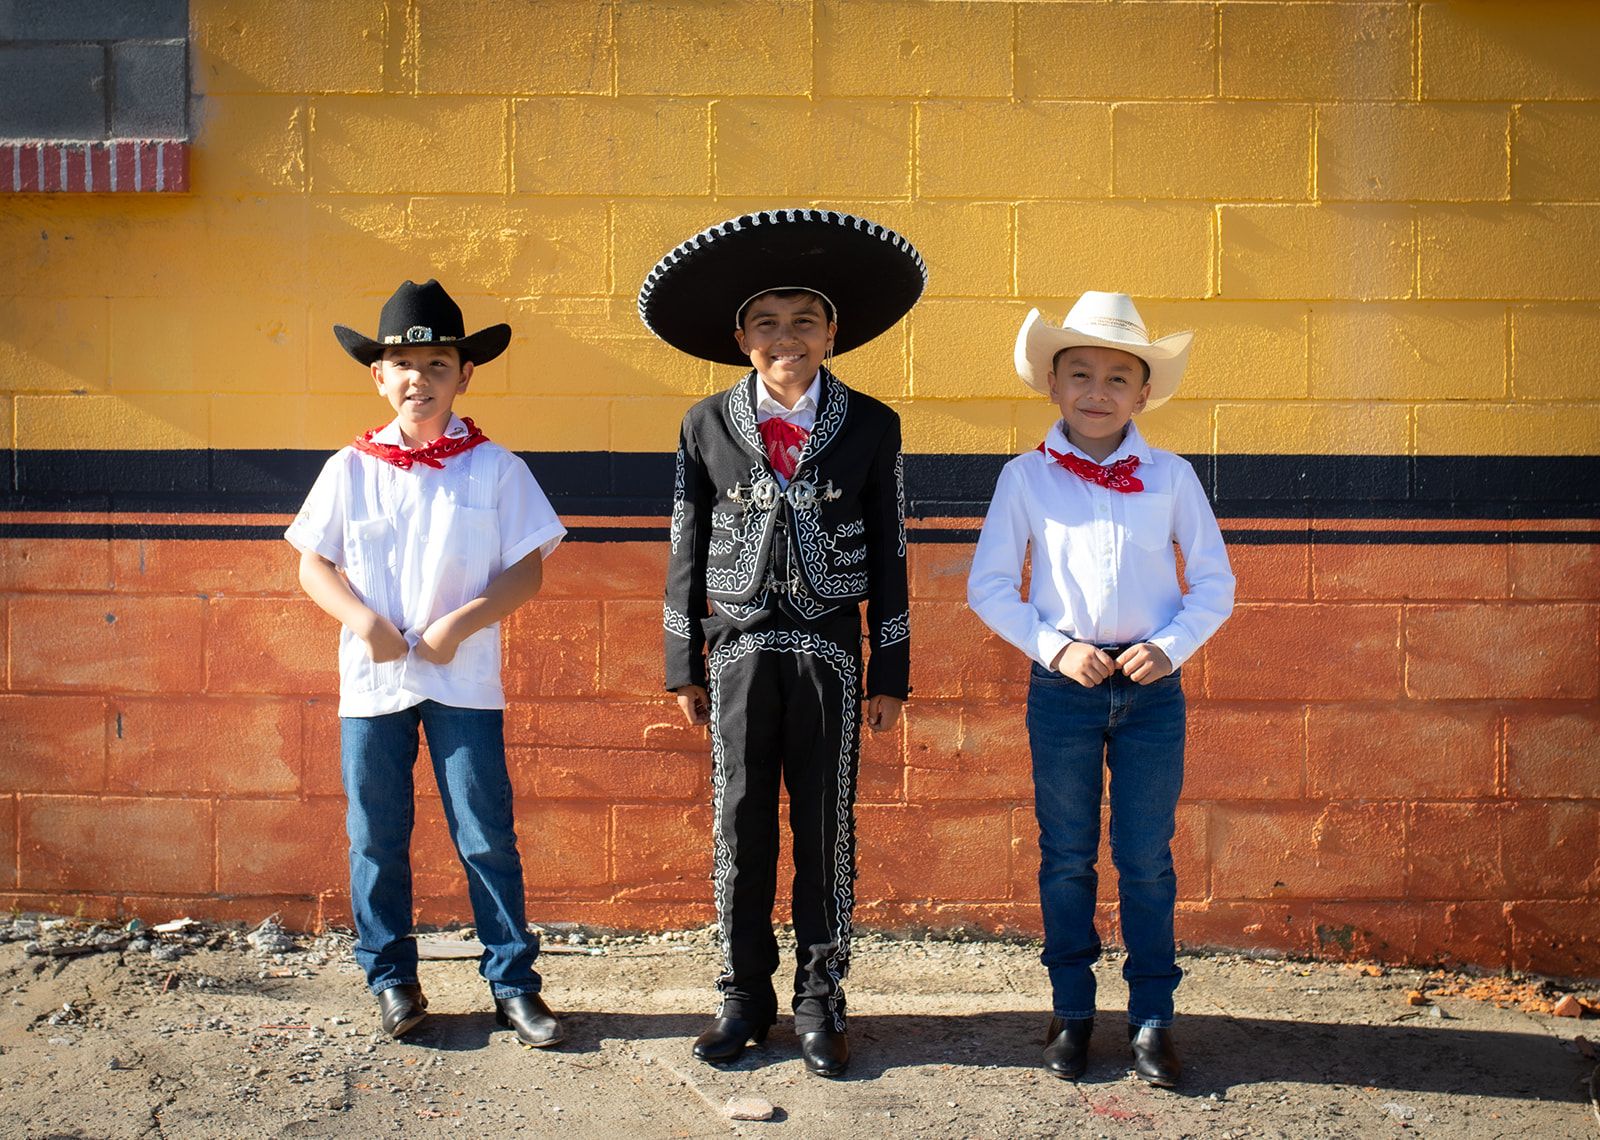 Three young boys are lined up in front of a building smiling at the camera. The boys on the left and right are wearing white shirts, jeans, and cowboy hats. The boy in the middle is wearing a traditional Mexican charro outfit in black.